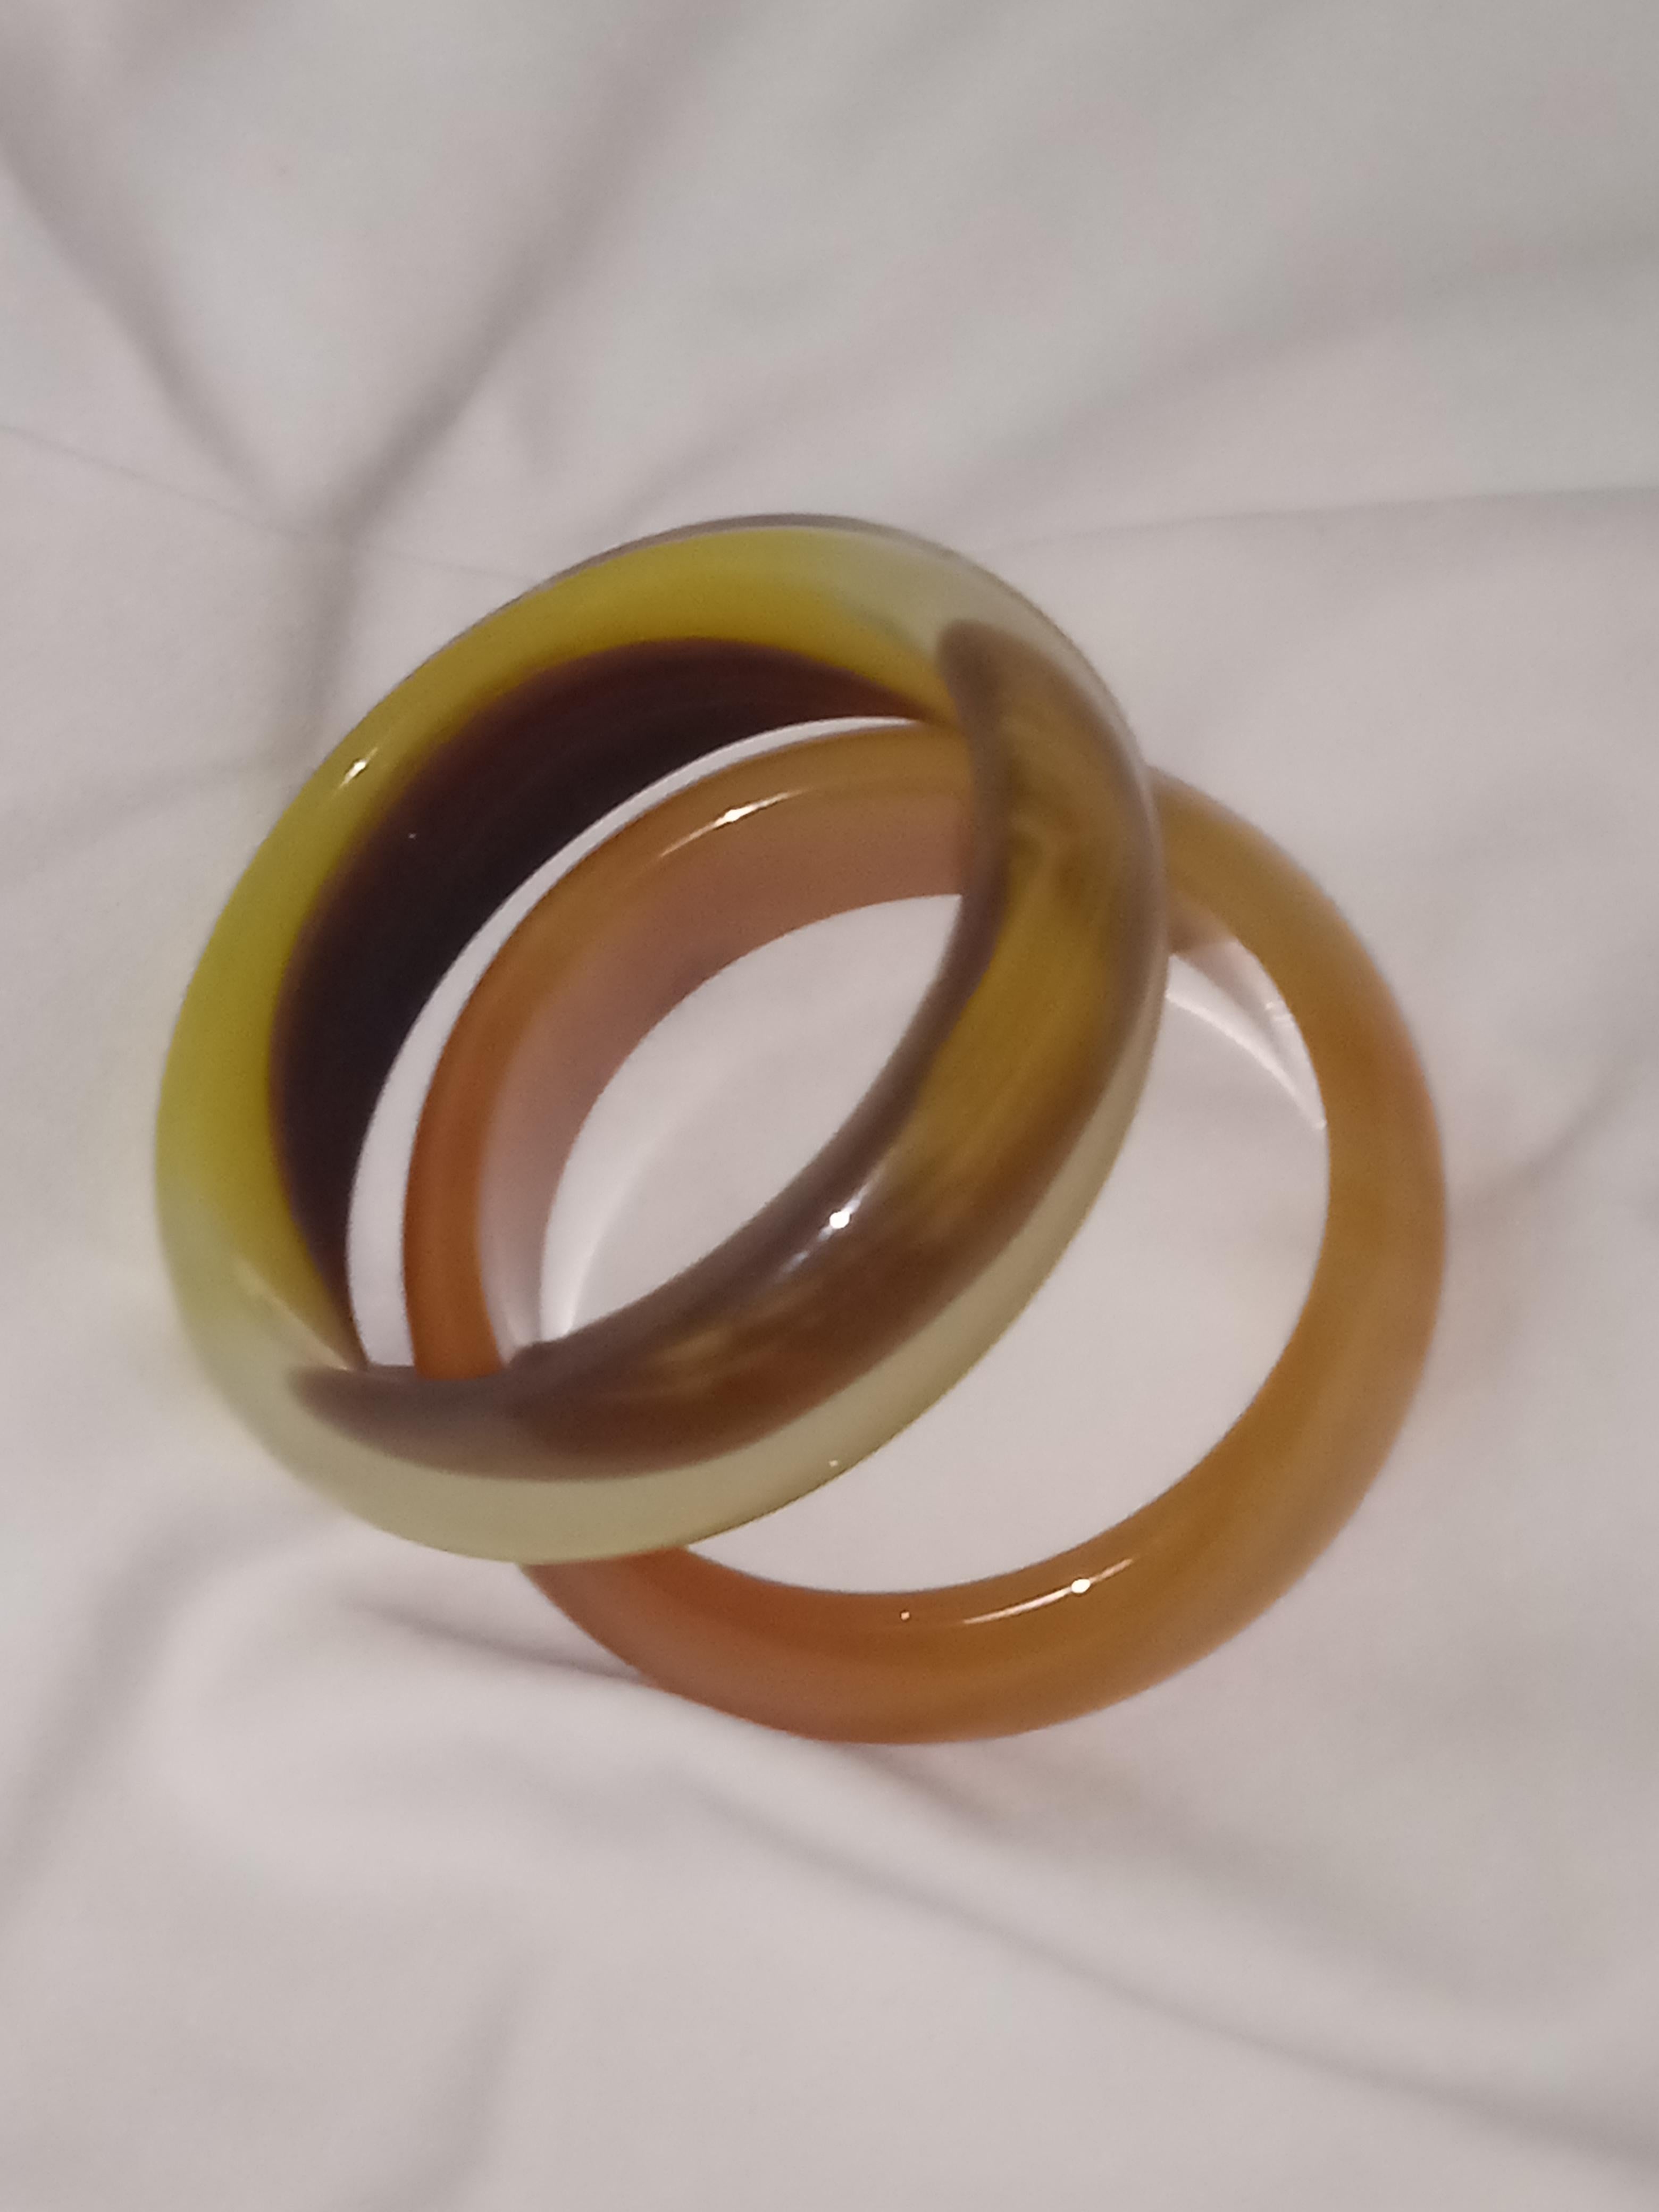 Natural Agate gem stone bangles pair  - Naturalistic Sculpture by Unknown